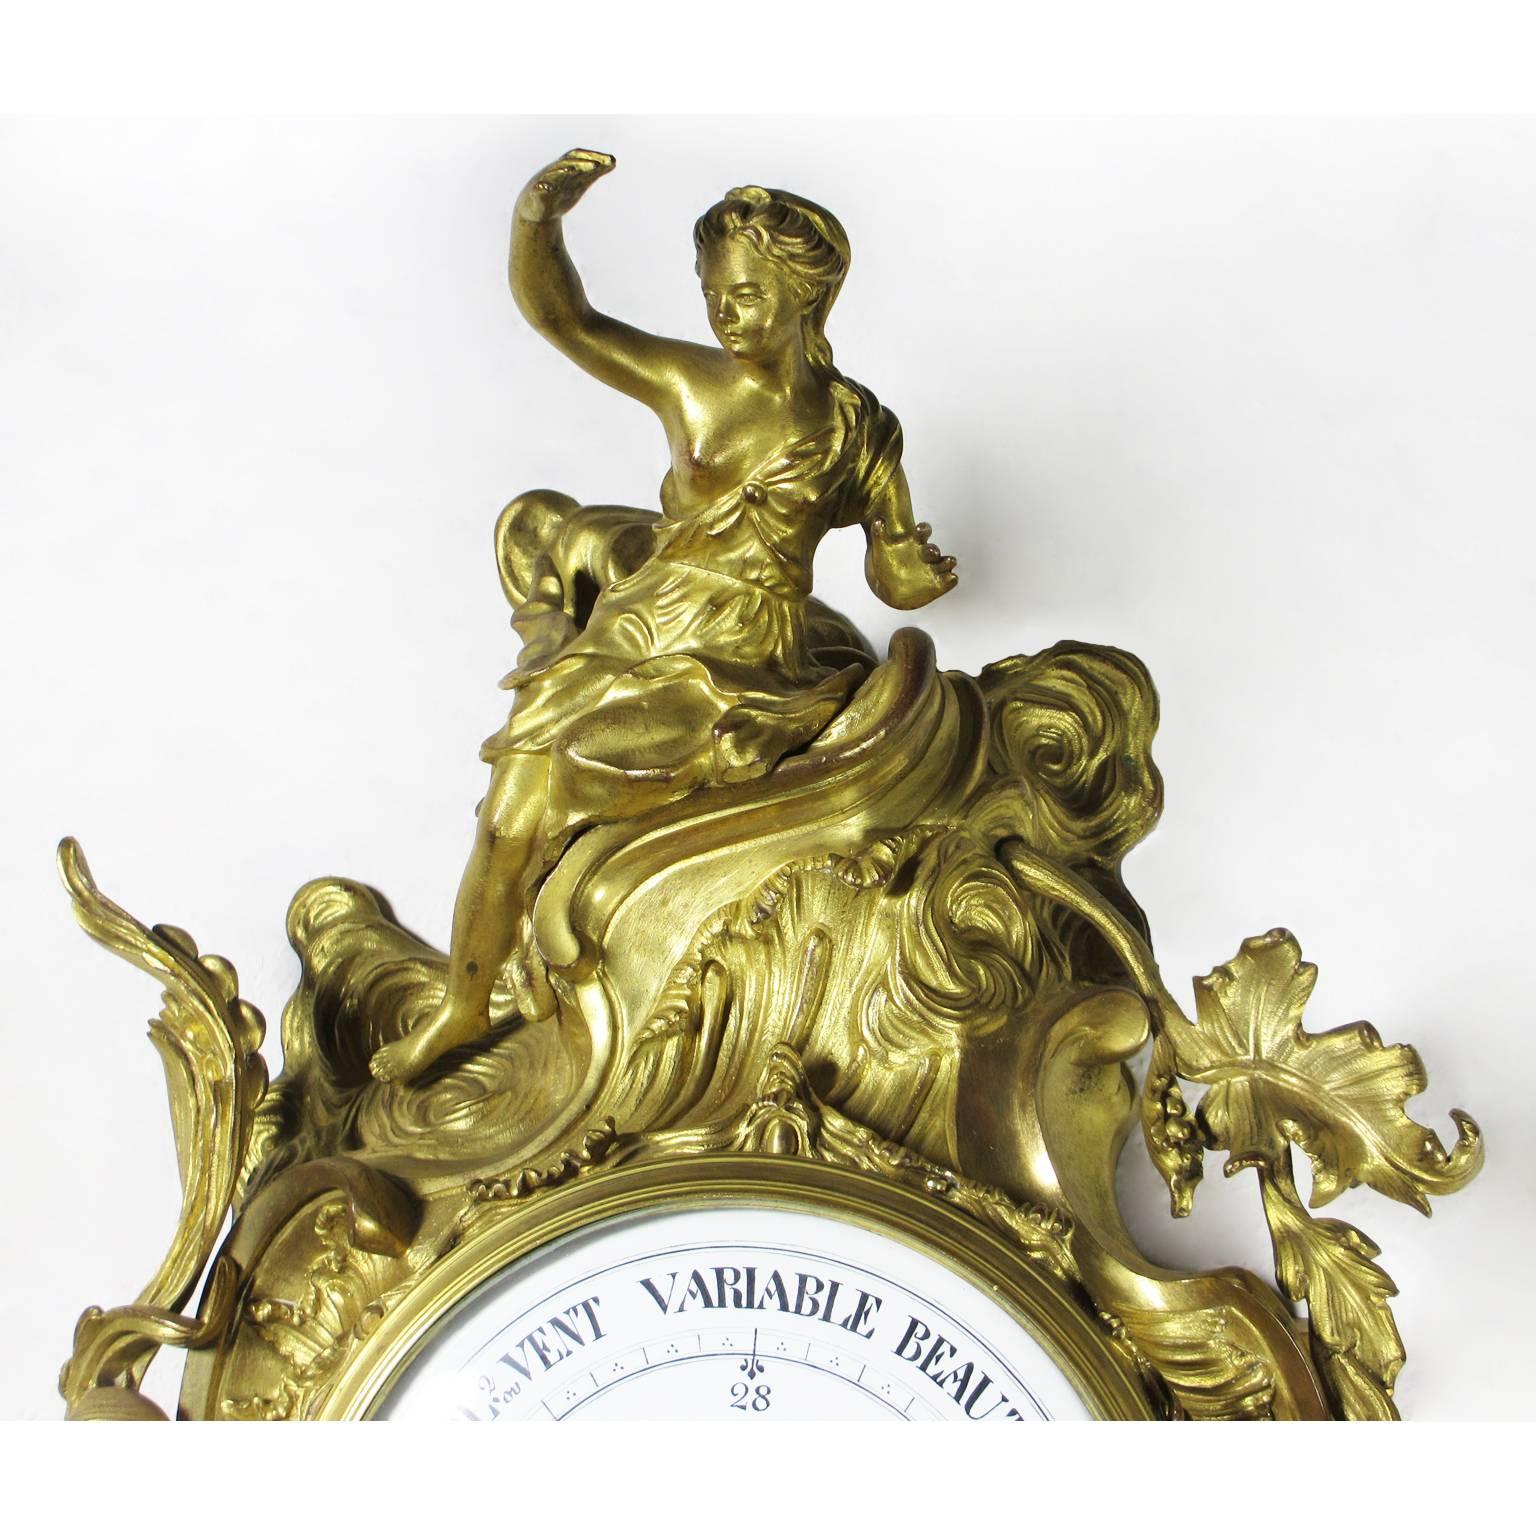 A very fine French 19th century Louis XV style gilt-bronze figural Cartel Barometer by A. Crin, A Paris. The wall mounting cartel barometer crowned with a figure of a seated maiden amongst acanthus and leaves, the circular porcelain dial with a